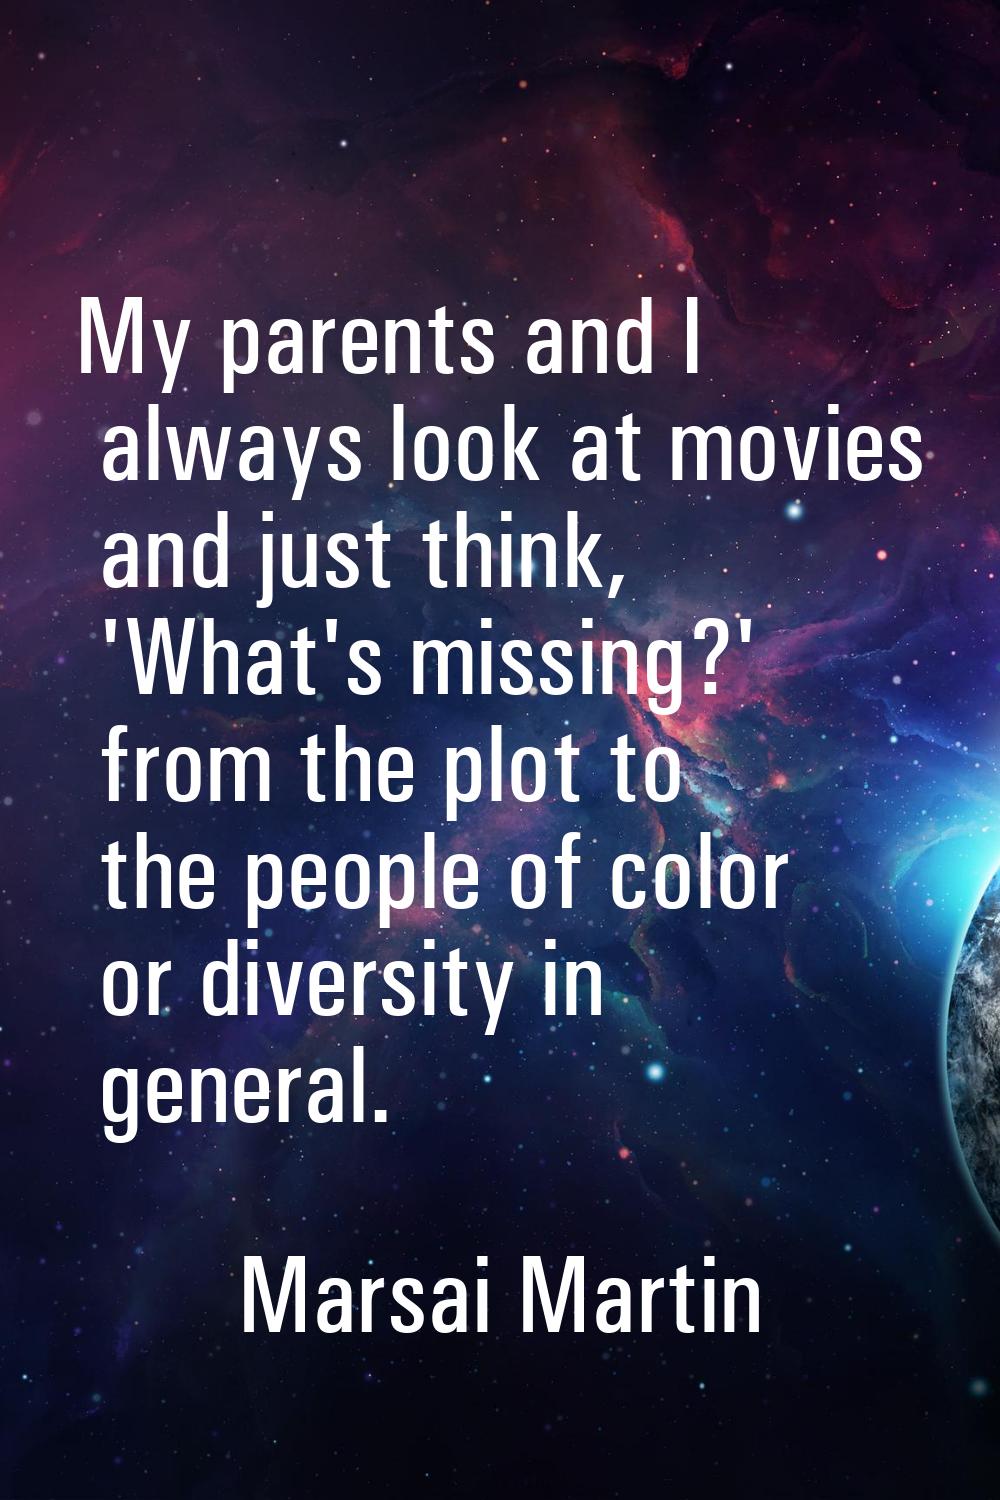 My parents and I always look at movies and just think, 'What's missing?' from the plot to the peopl